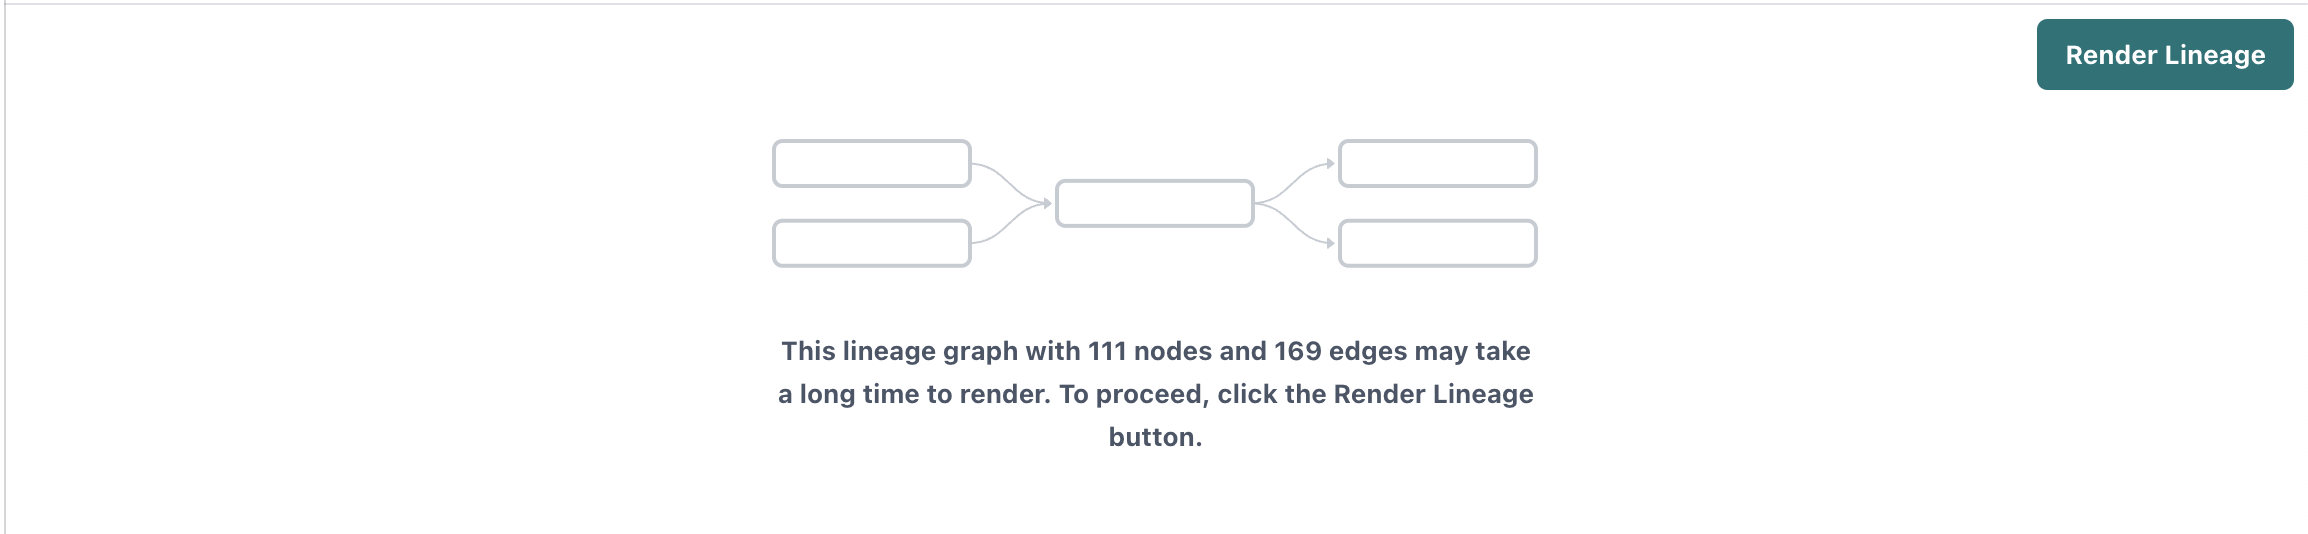 Render Lineage